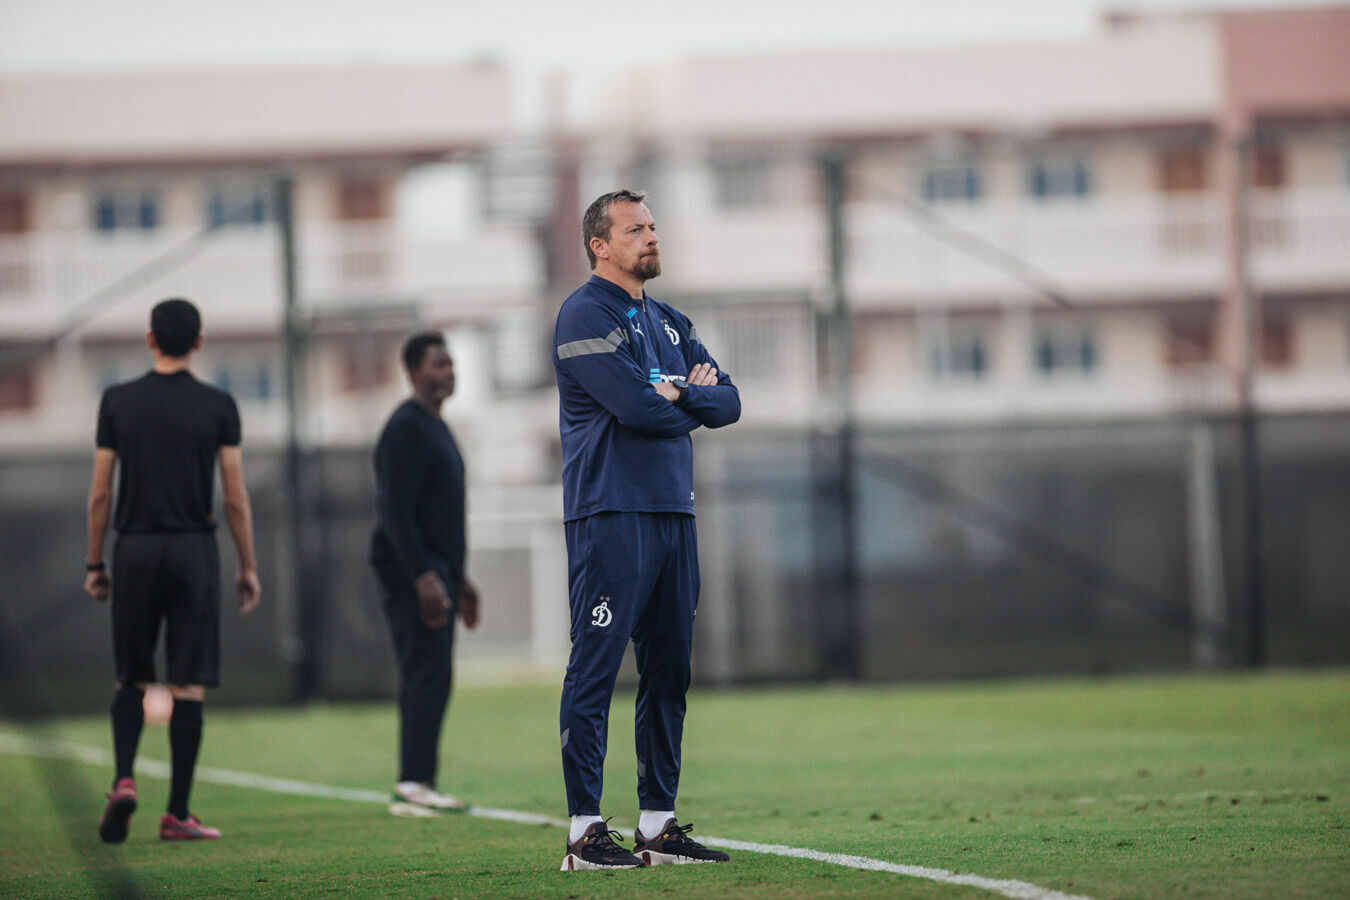 Slavisa Jokanovic: We saw what aspects we need to improve in our game